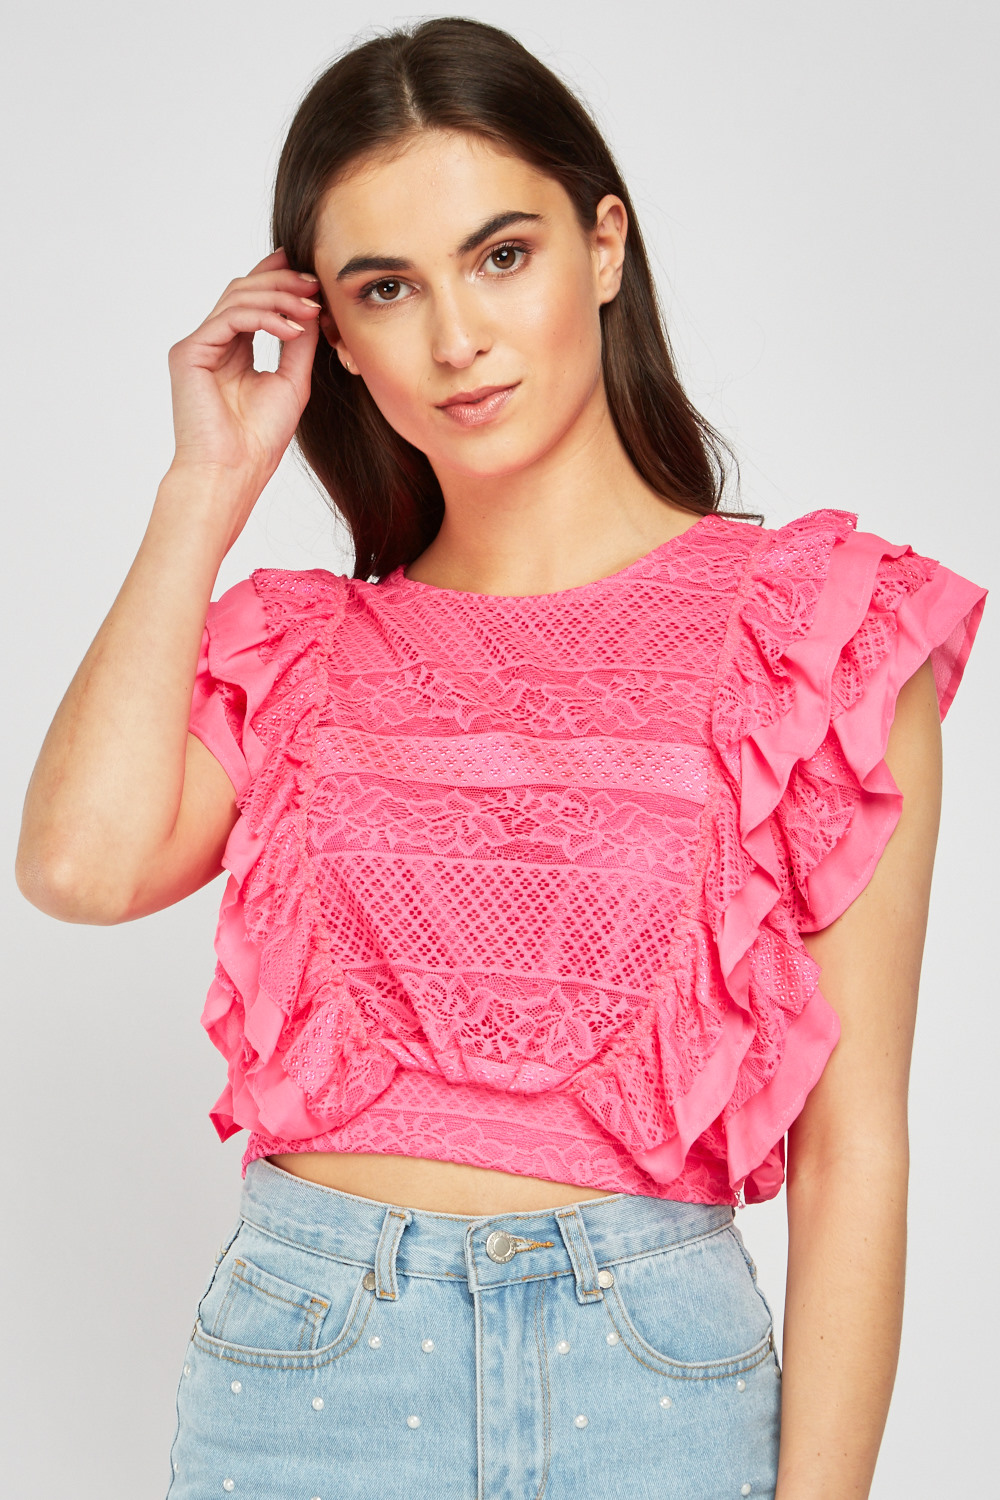 Ruffle Lace Crop Top - Just $7